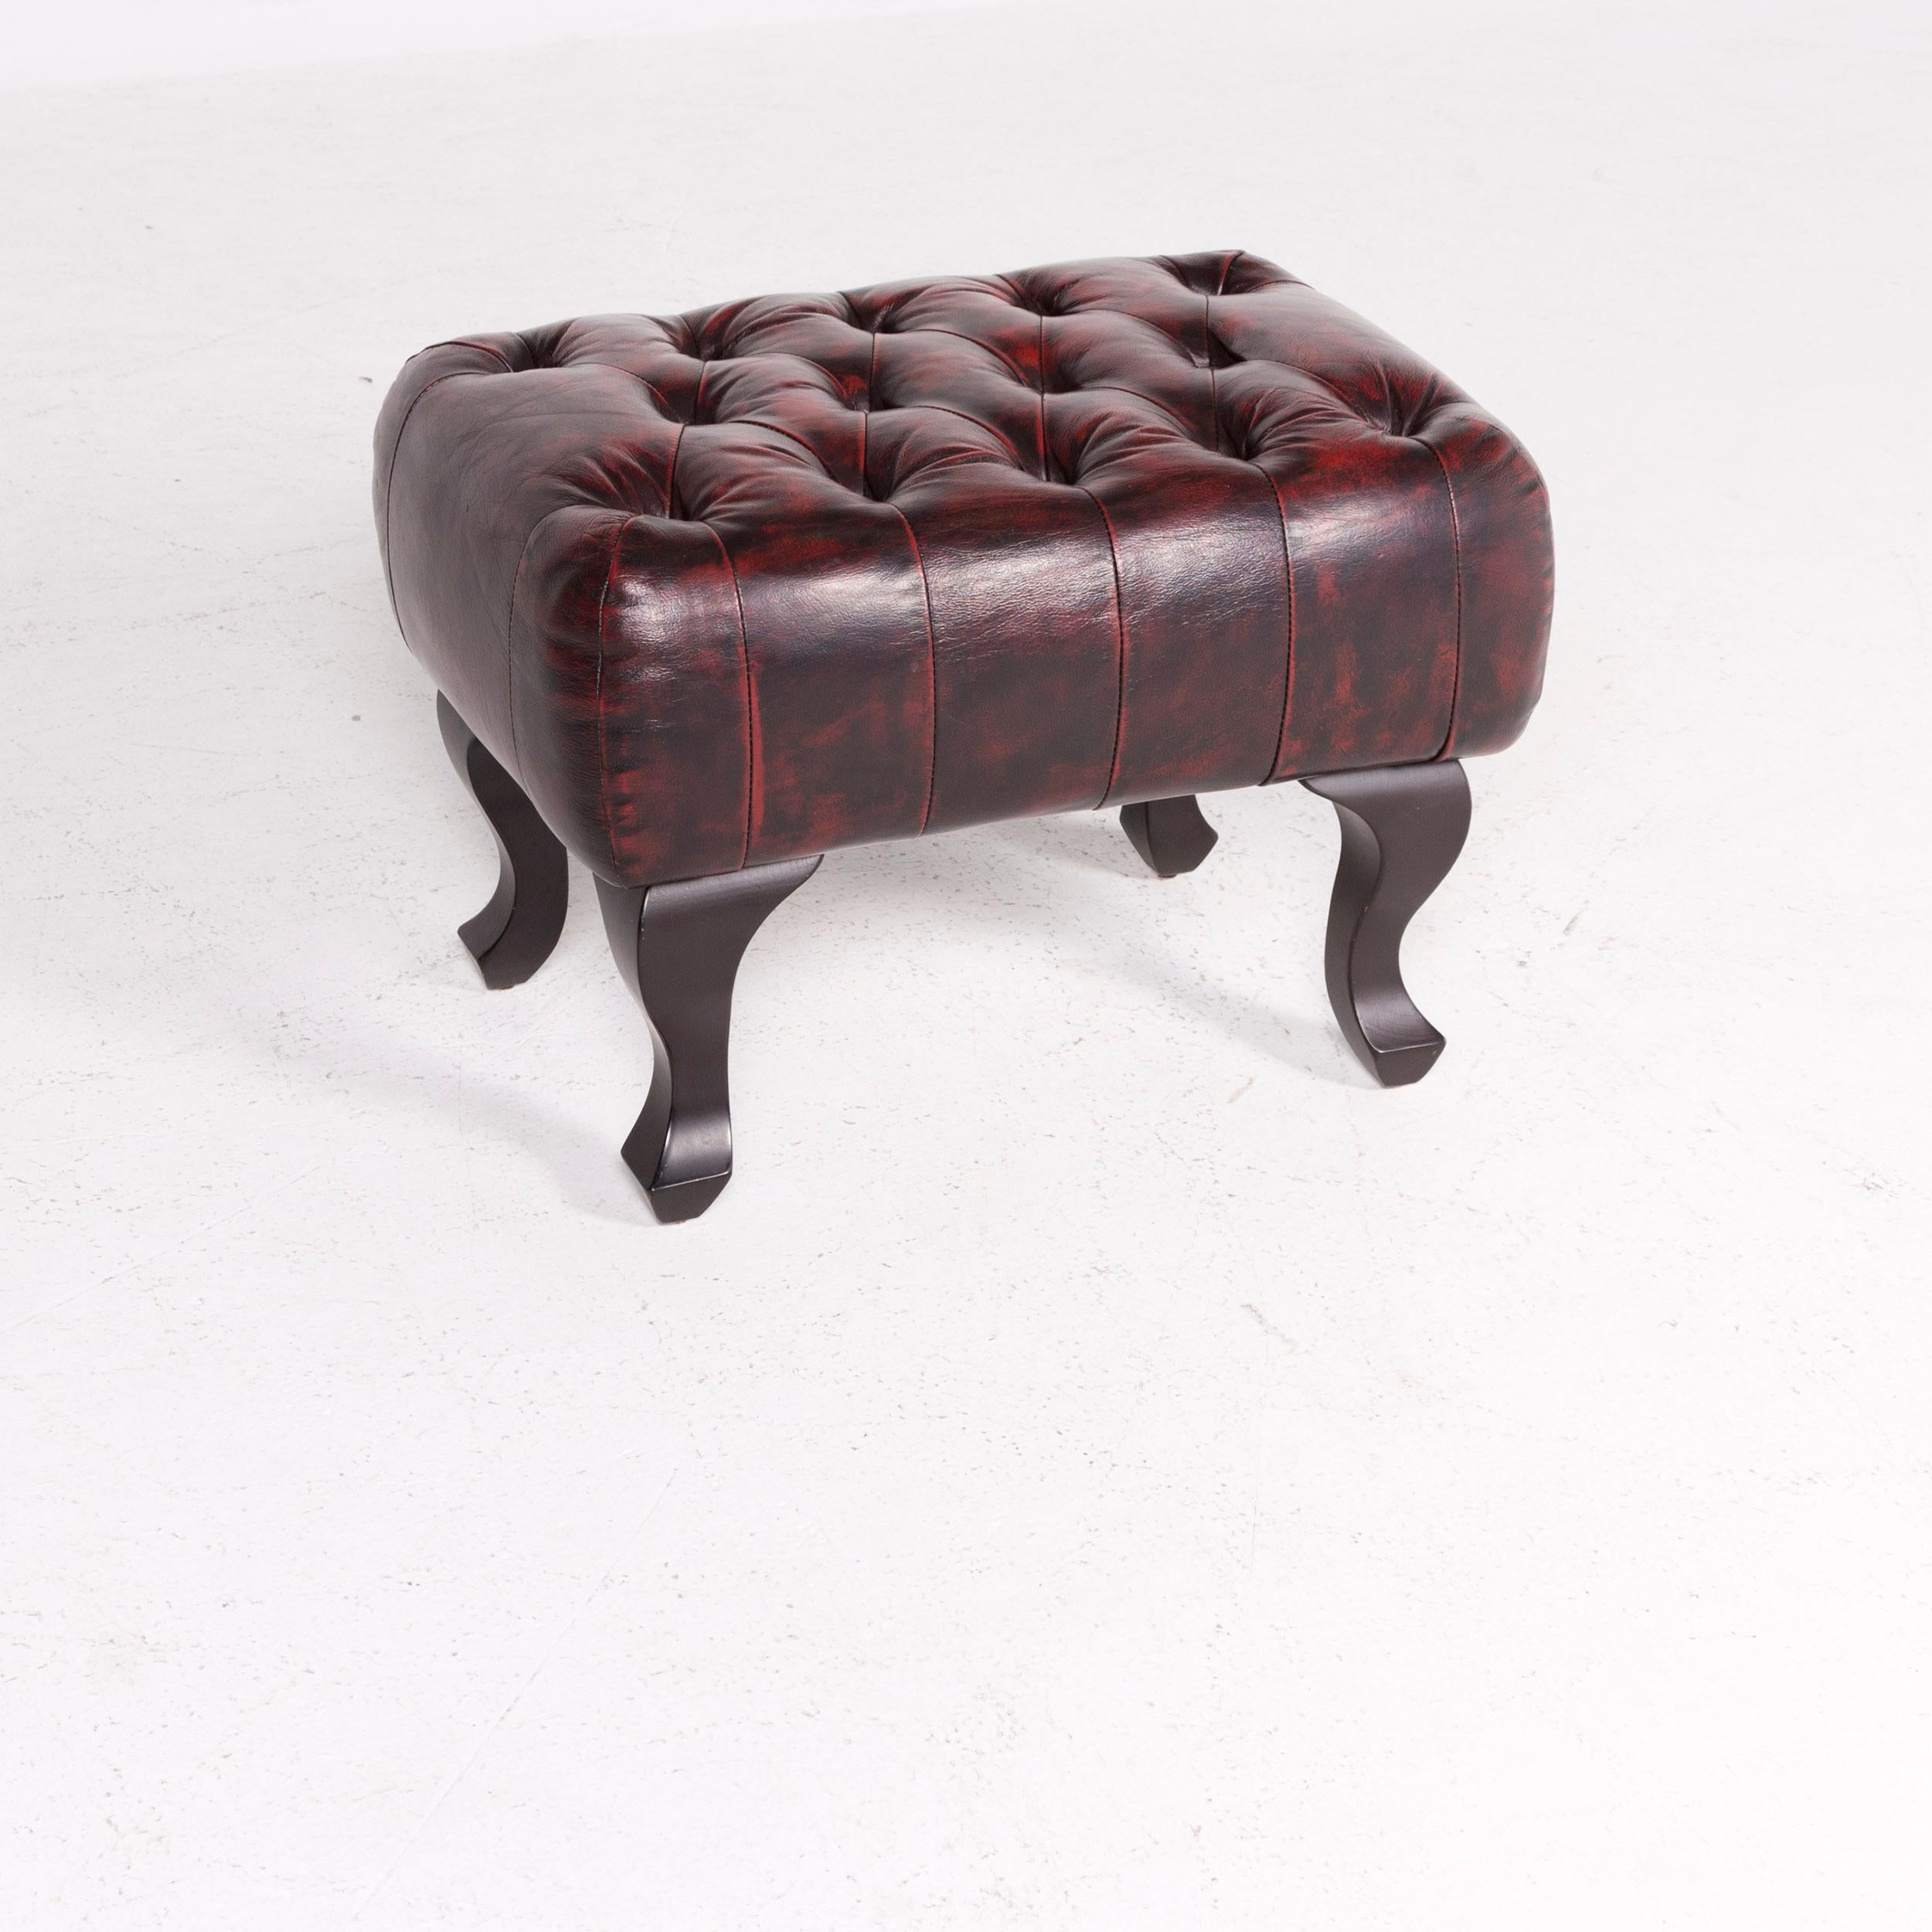 We bring to you a Chesterfield leather stool red genuine leather stool vintage retro.

Product measurements in centimeters:

Depth 44
Width 63
Height 48.





   